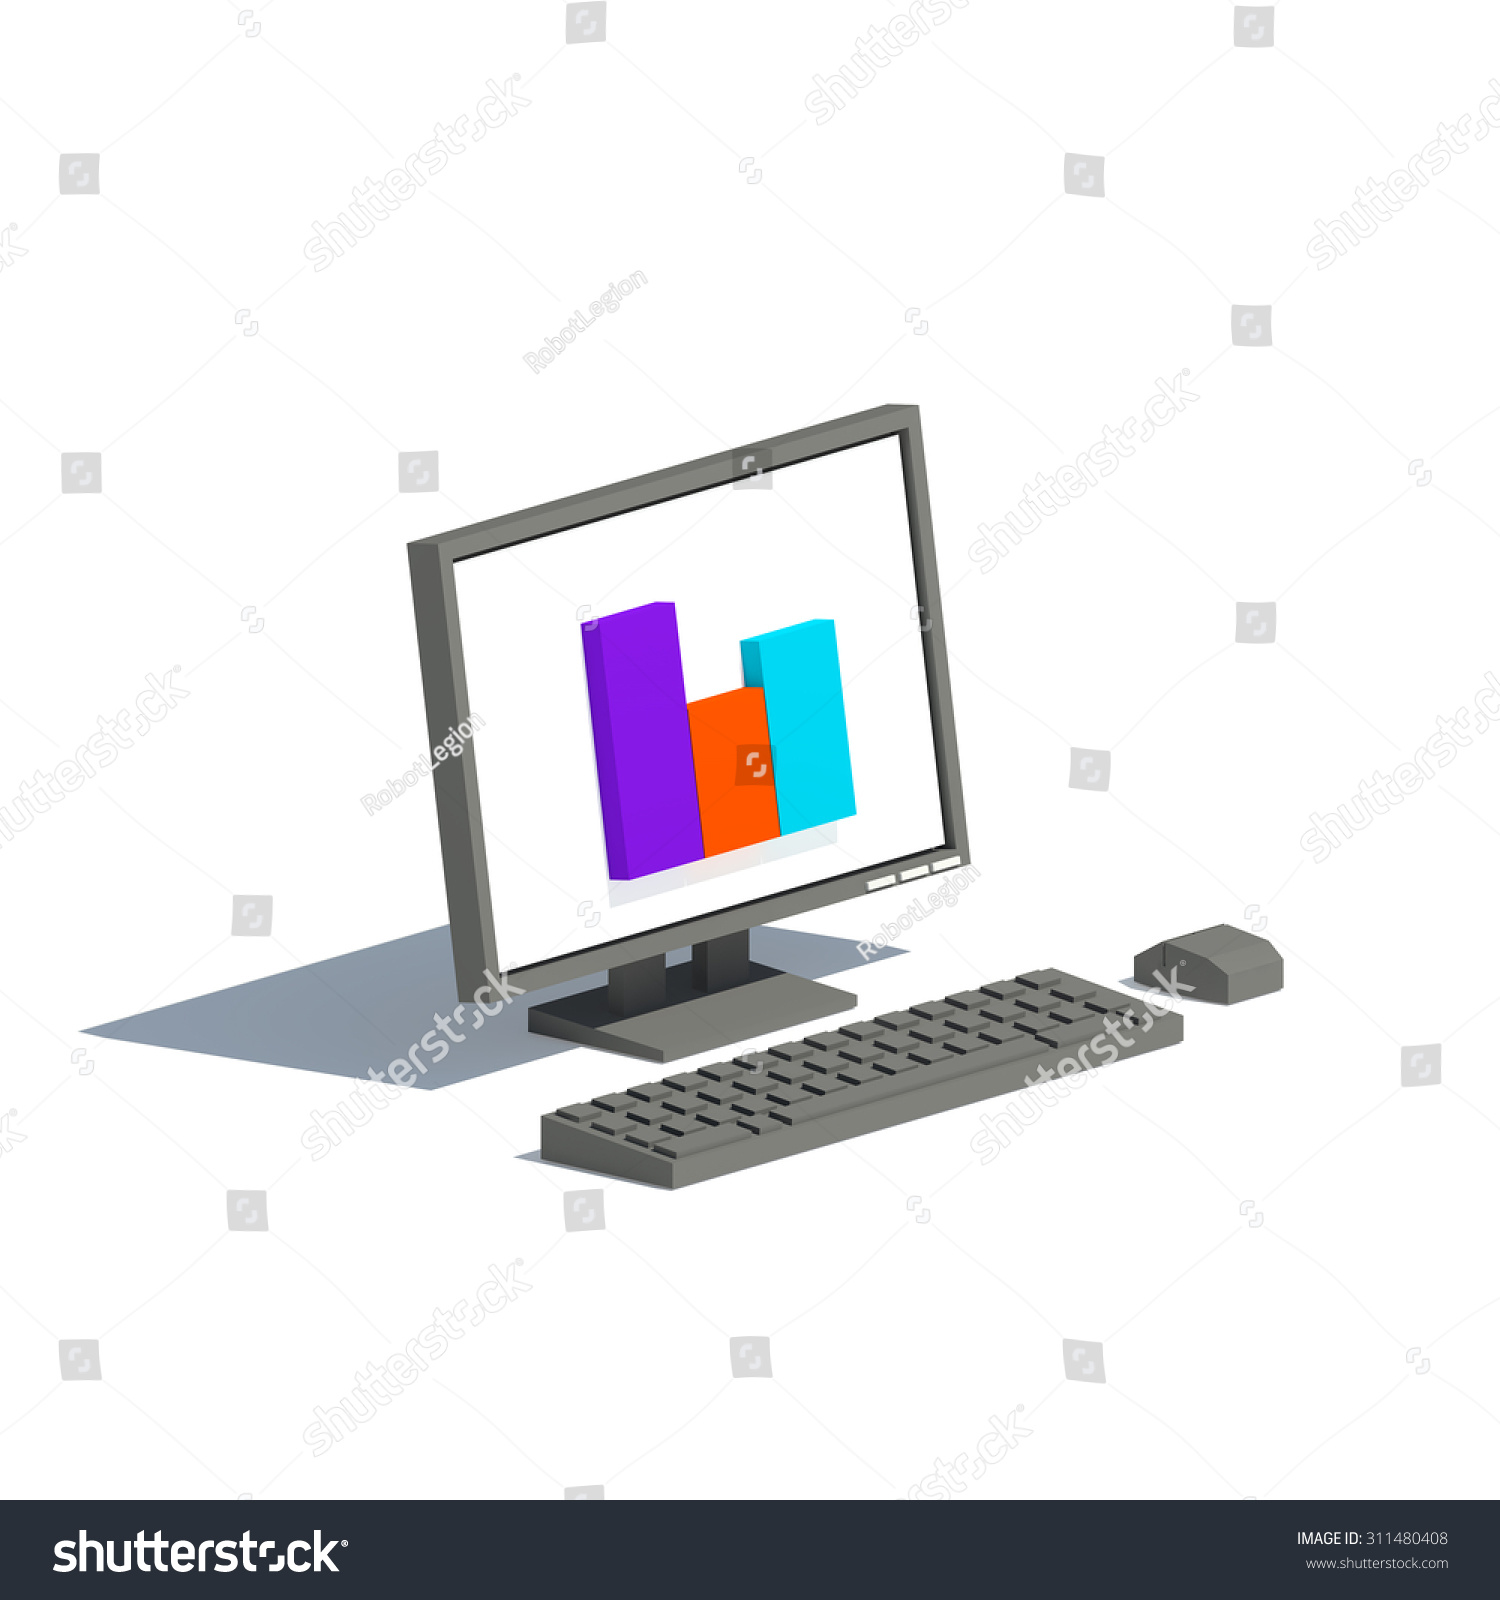 Low Poly Black Gray Computer Monitor Stock Illustration 311480408 ...